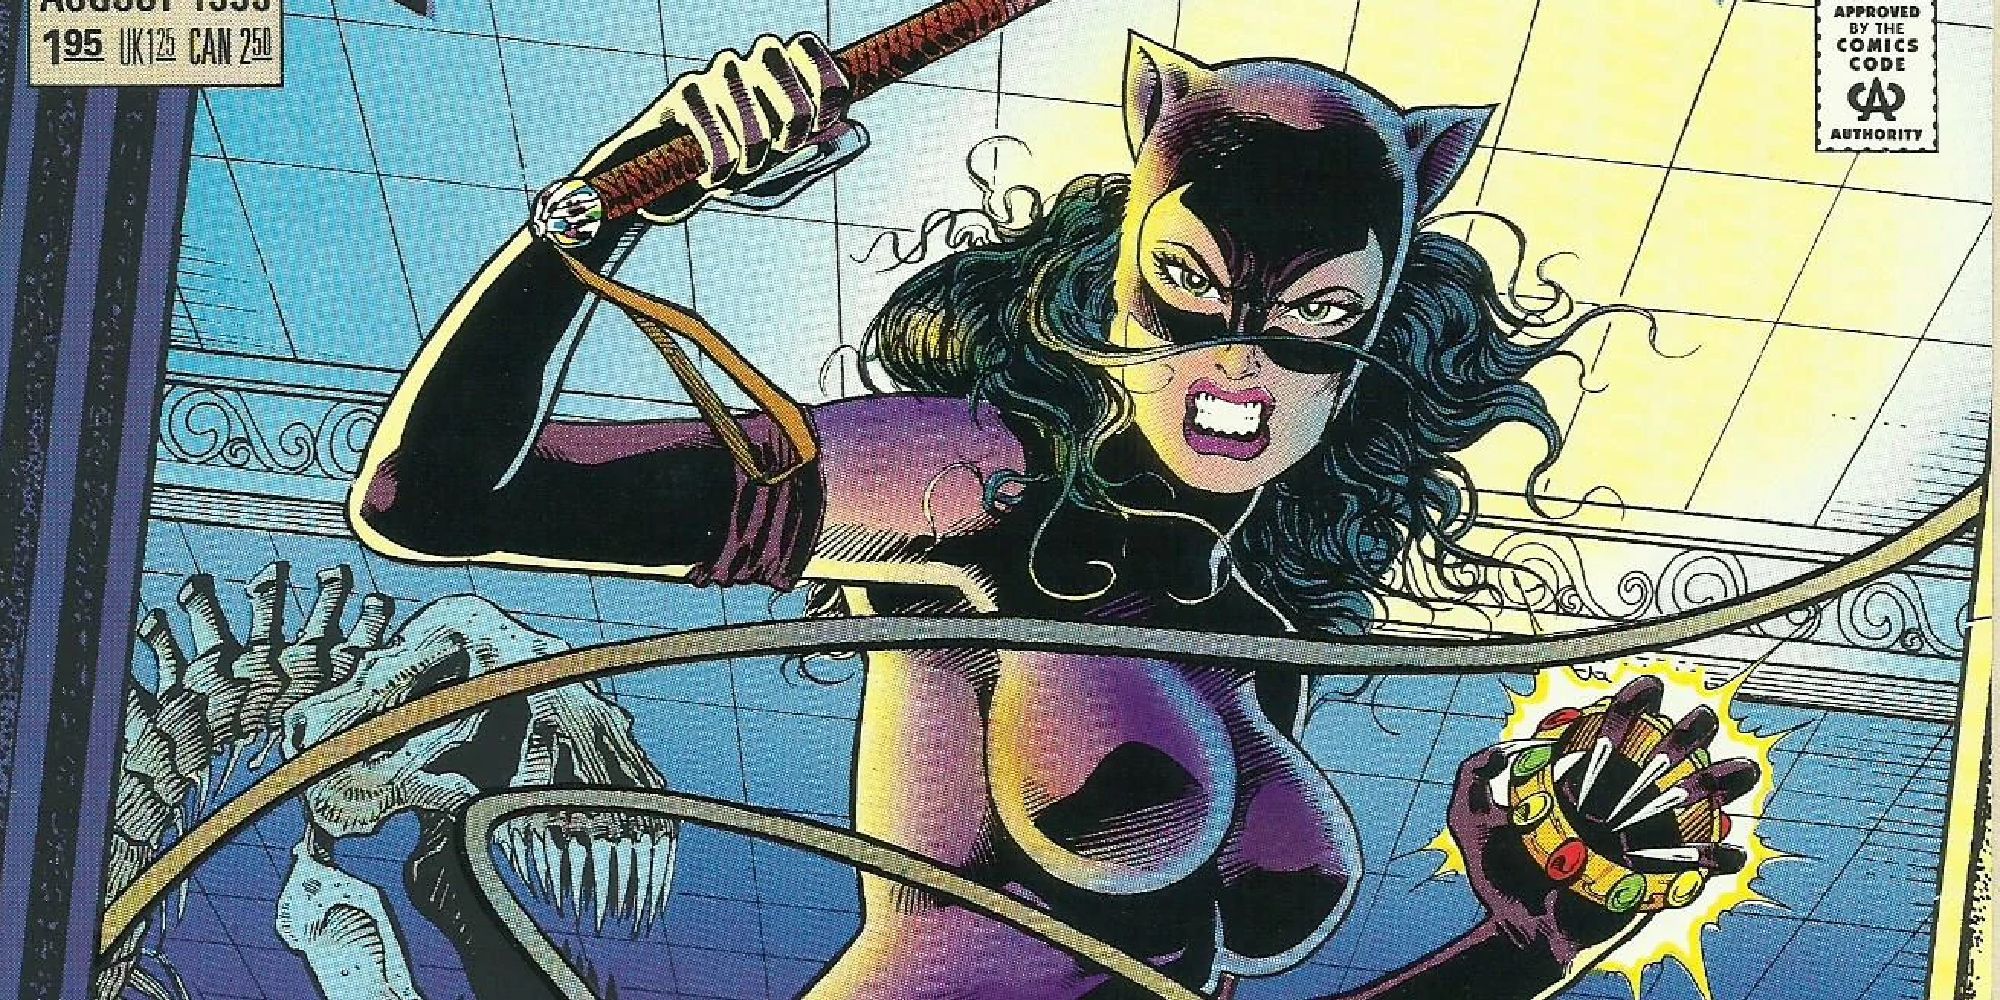 Catwoman brandishing a whip and stealing jewels from a comic cover